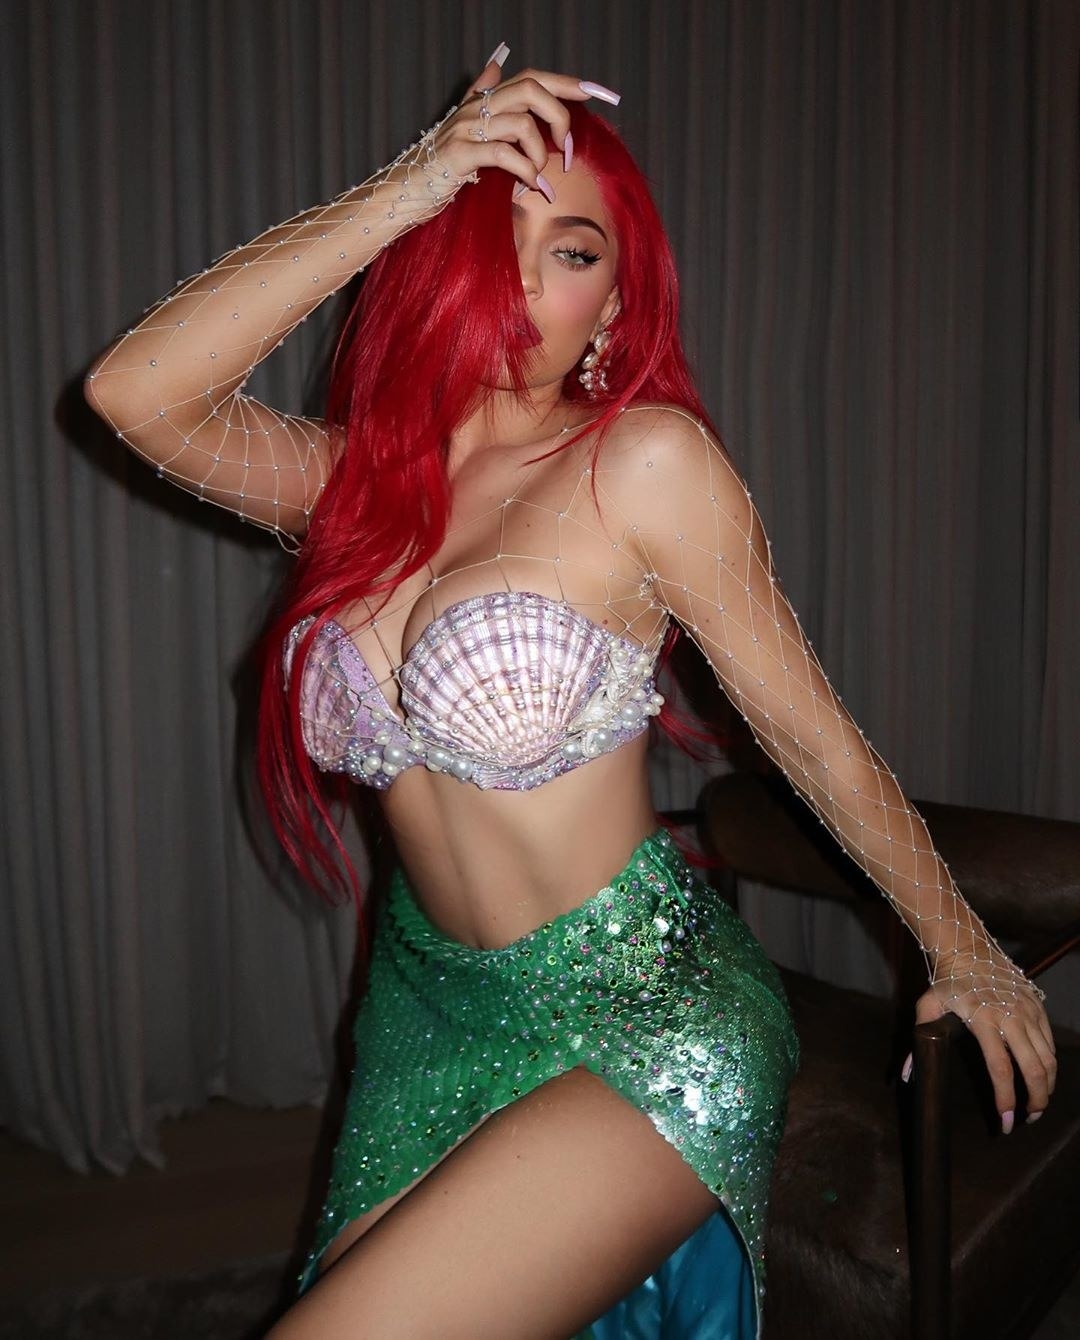 Ariel caught playing with herself